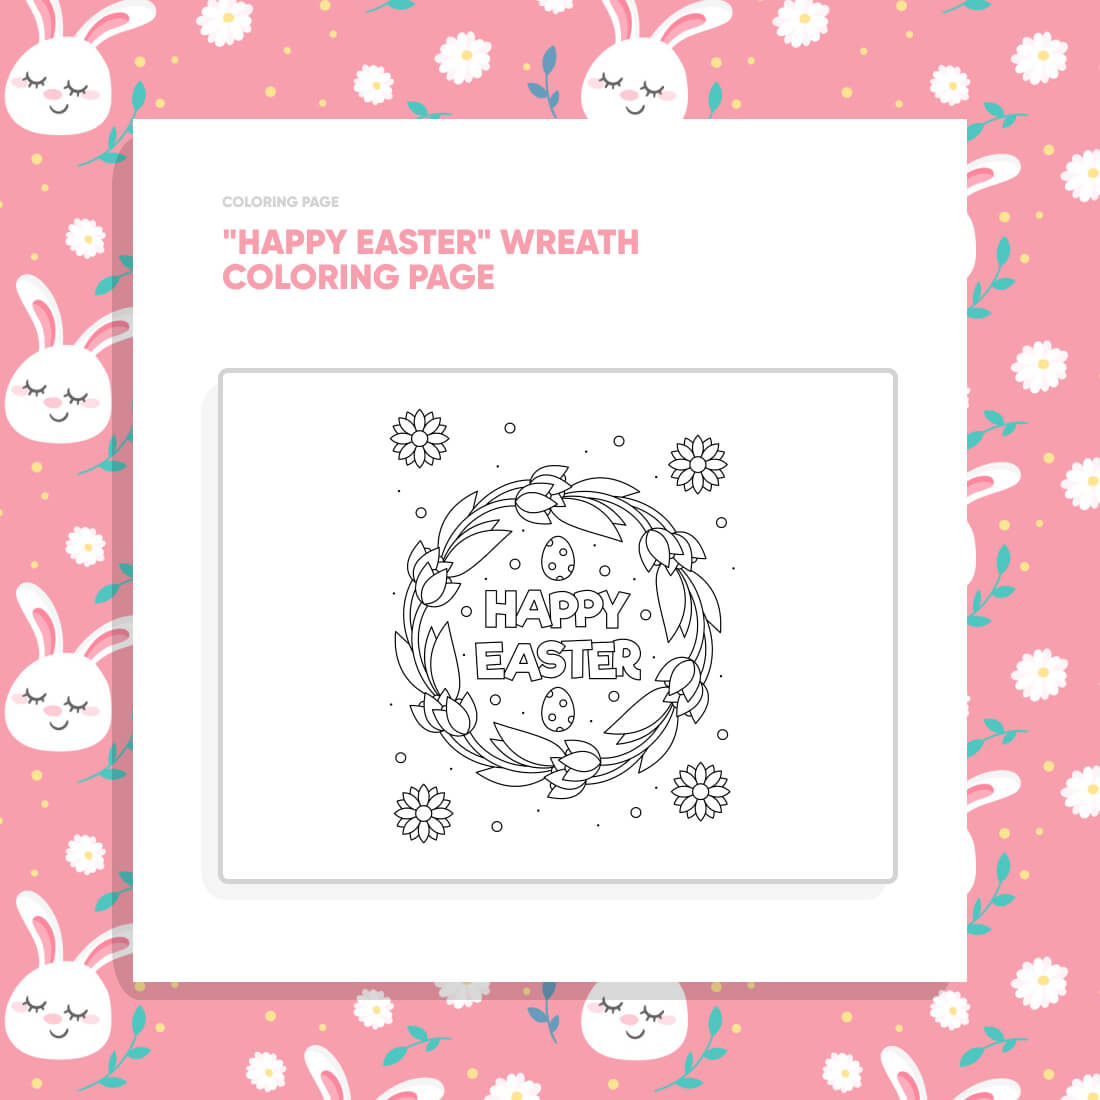 "Happy Easter" Wreath Coloring Page preview image.